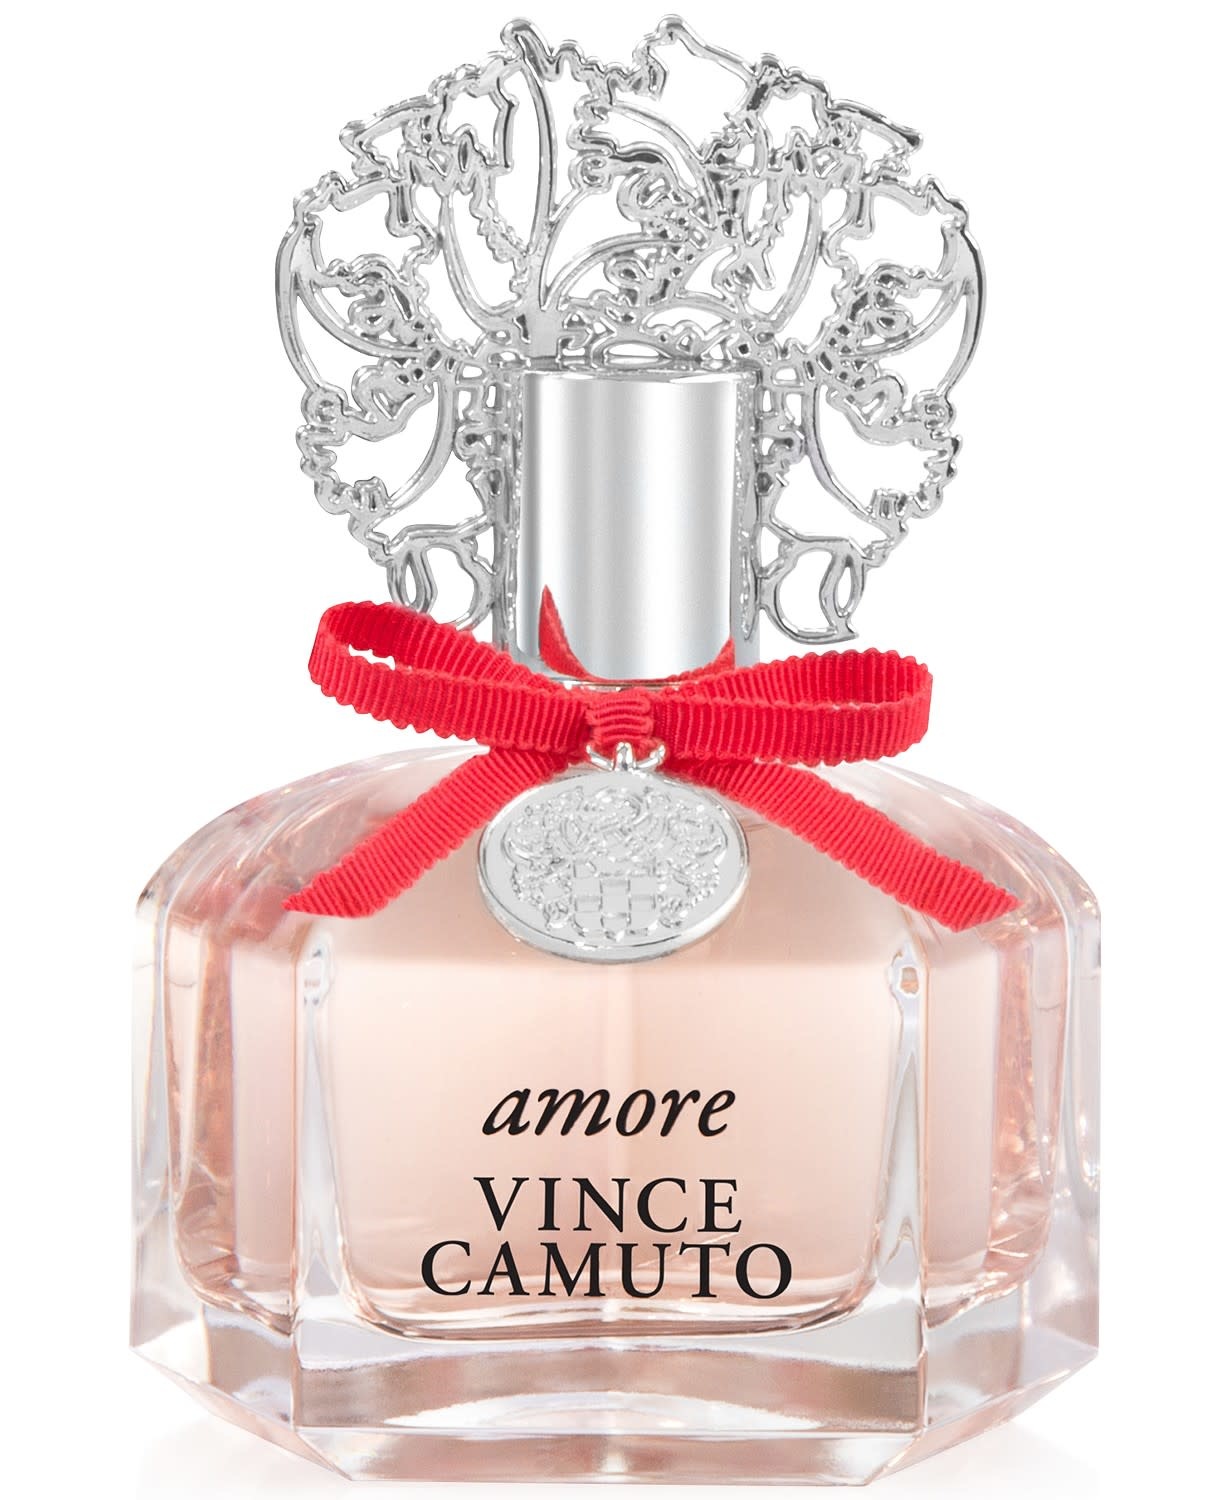 Vince camuto for Women - Amore EdP - The Scent Masters